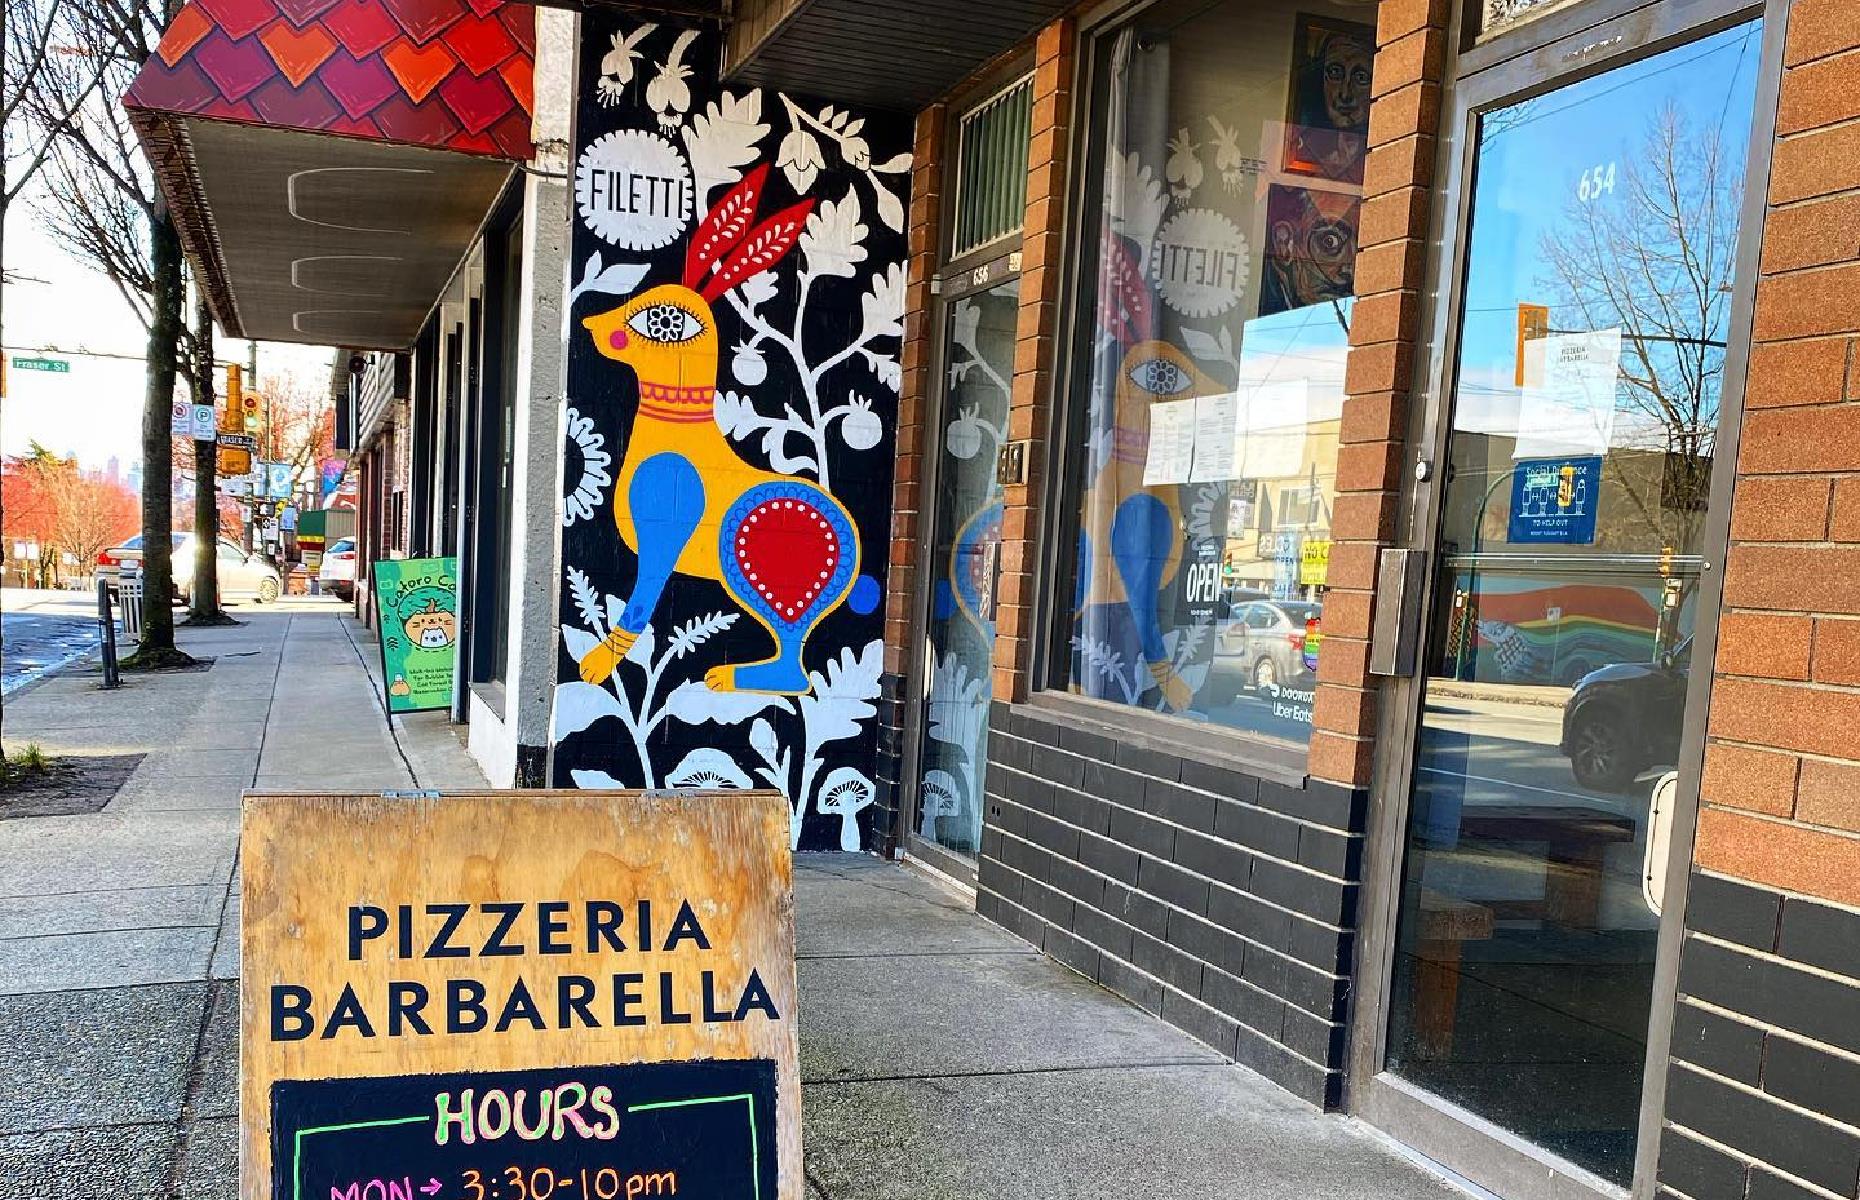 <p>A working class neighborhood until relatively recently, <a href="https://scoutmagazine.ca/hoods/fraserhood/">Fraserhood's</a> cultural diversity is best reflected in its vibrant restaurant community, with pho eateries, fancy pizza places, pasta joints (including the much-vaunted <a href="https://www.pizzeriabarbarella.com/">Pizzeria Barbella</a>), taquerias and coffee roasters. Since this is beautiful Vancouver, expect outdoor elements like parks and mountain views.</p>